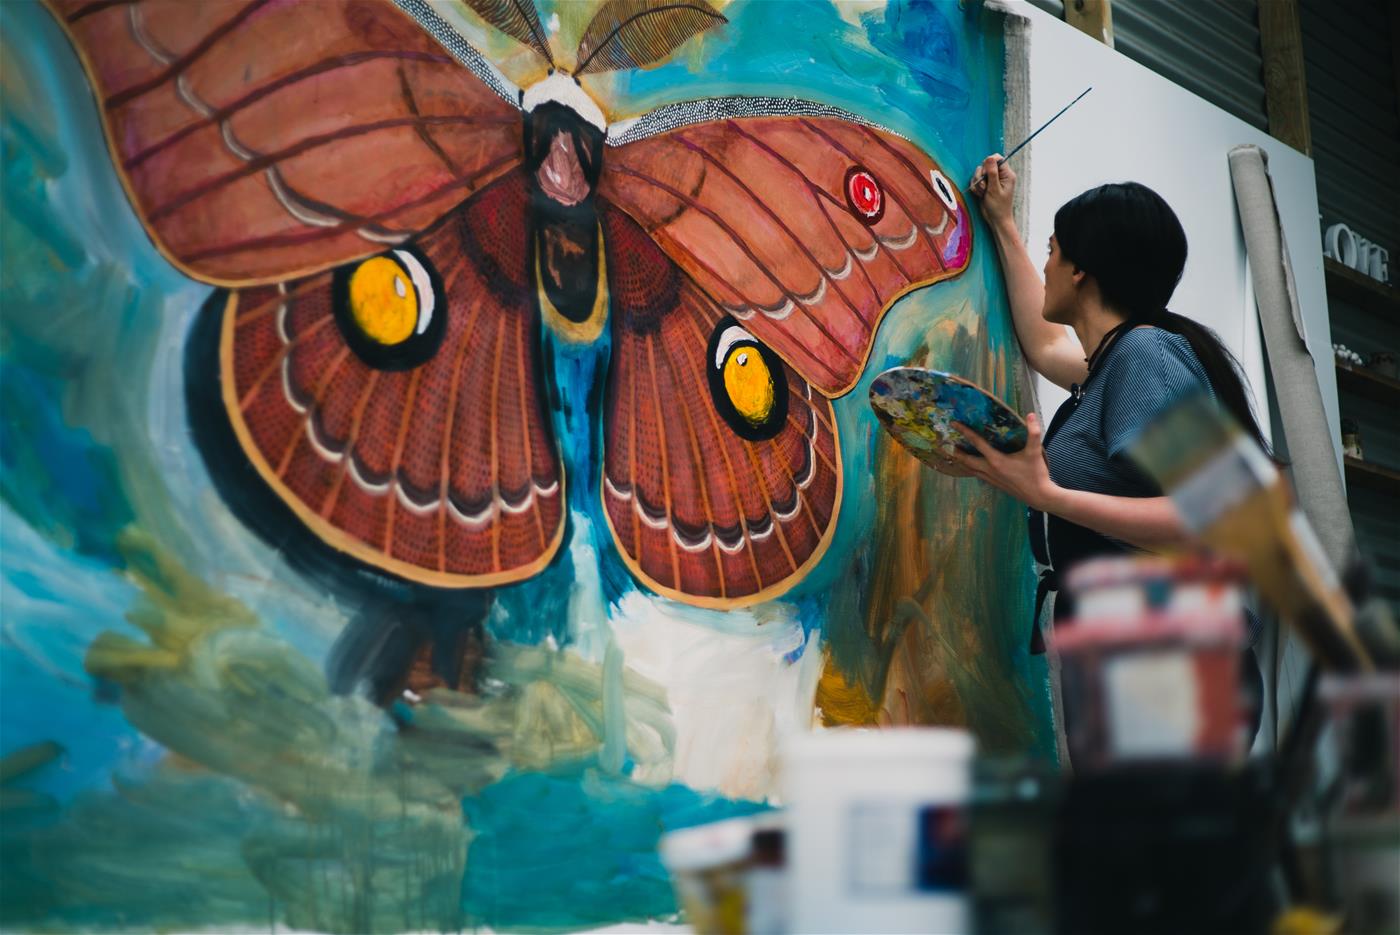 Albany Artist and Creative Grid Mentee Chelsea Hopkins-Allan painting a larger than life Helena Gum Moth.